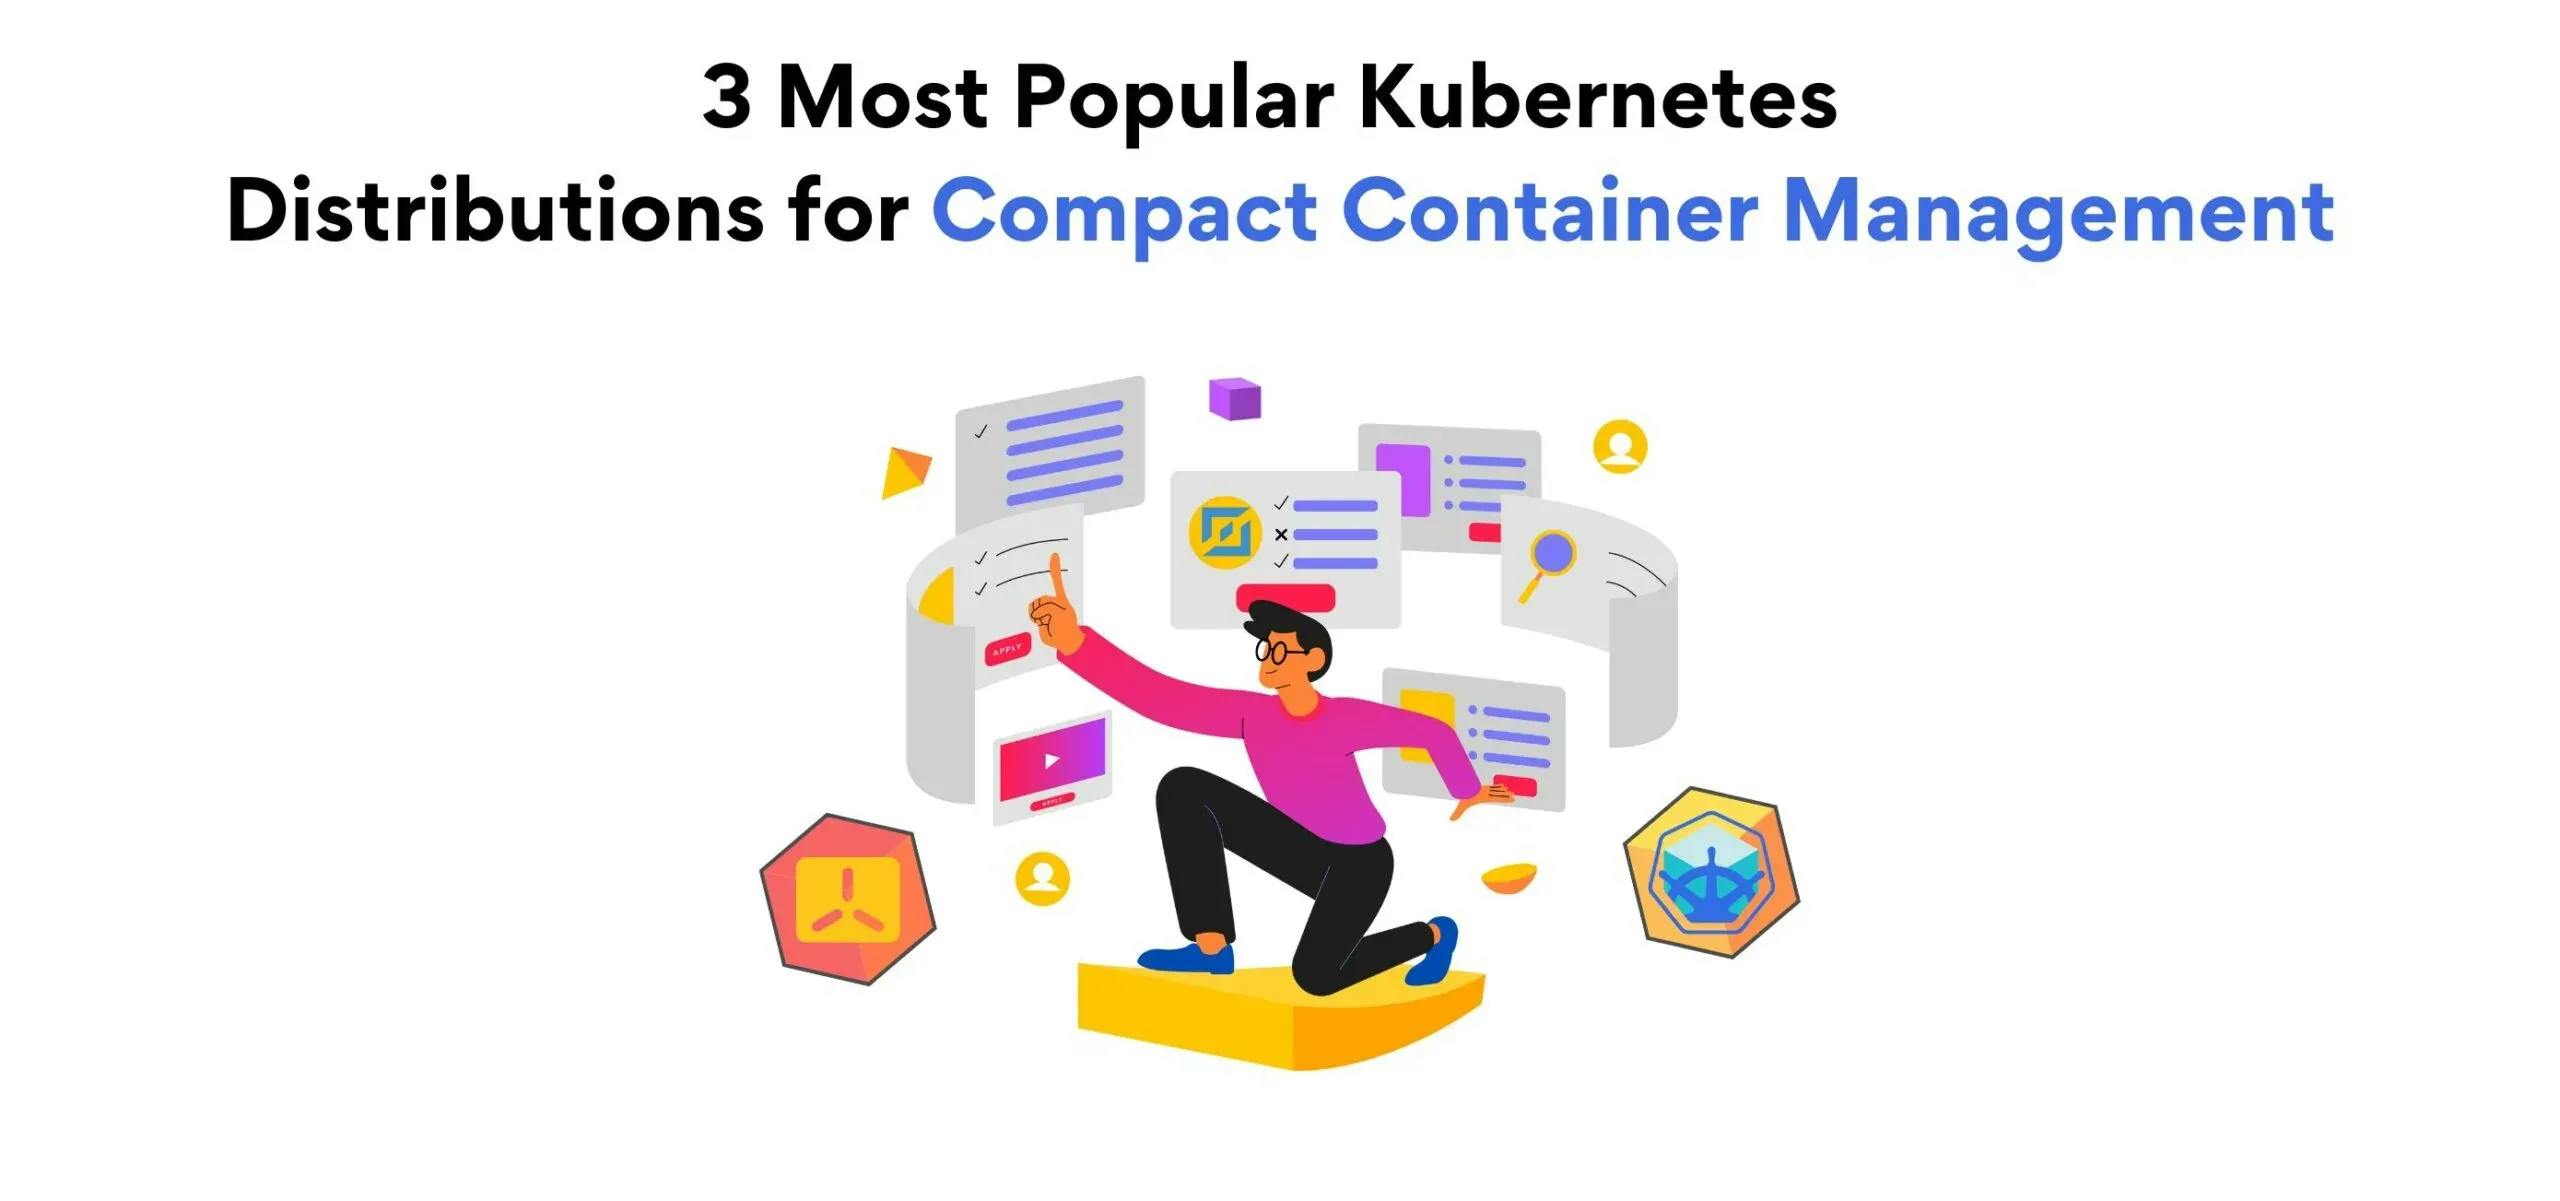 3 Most Popular Kubernetes Distributions for Compact Container Management